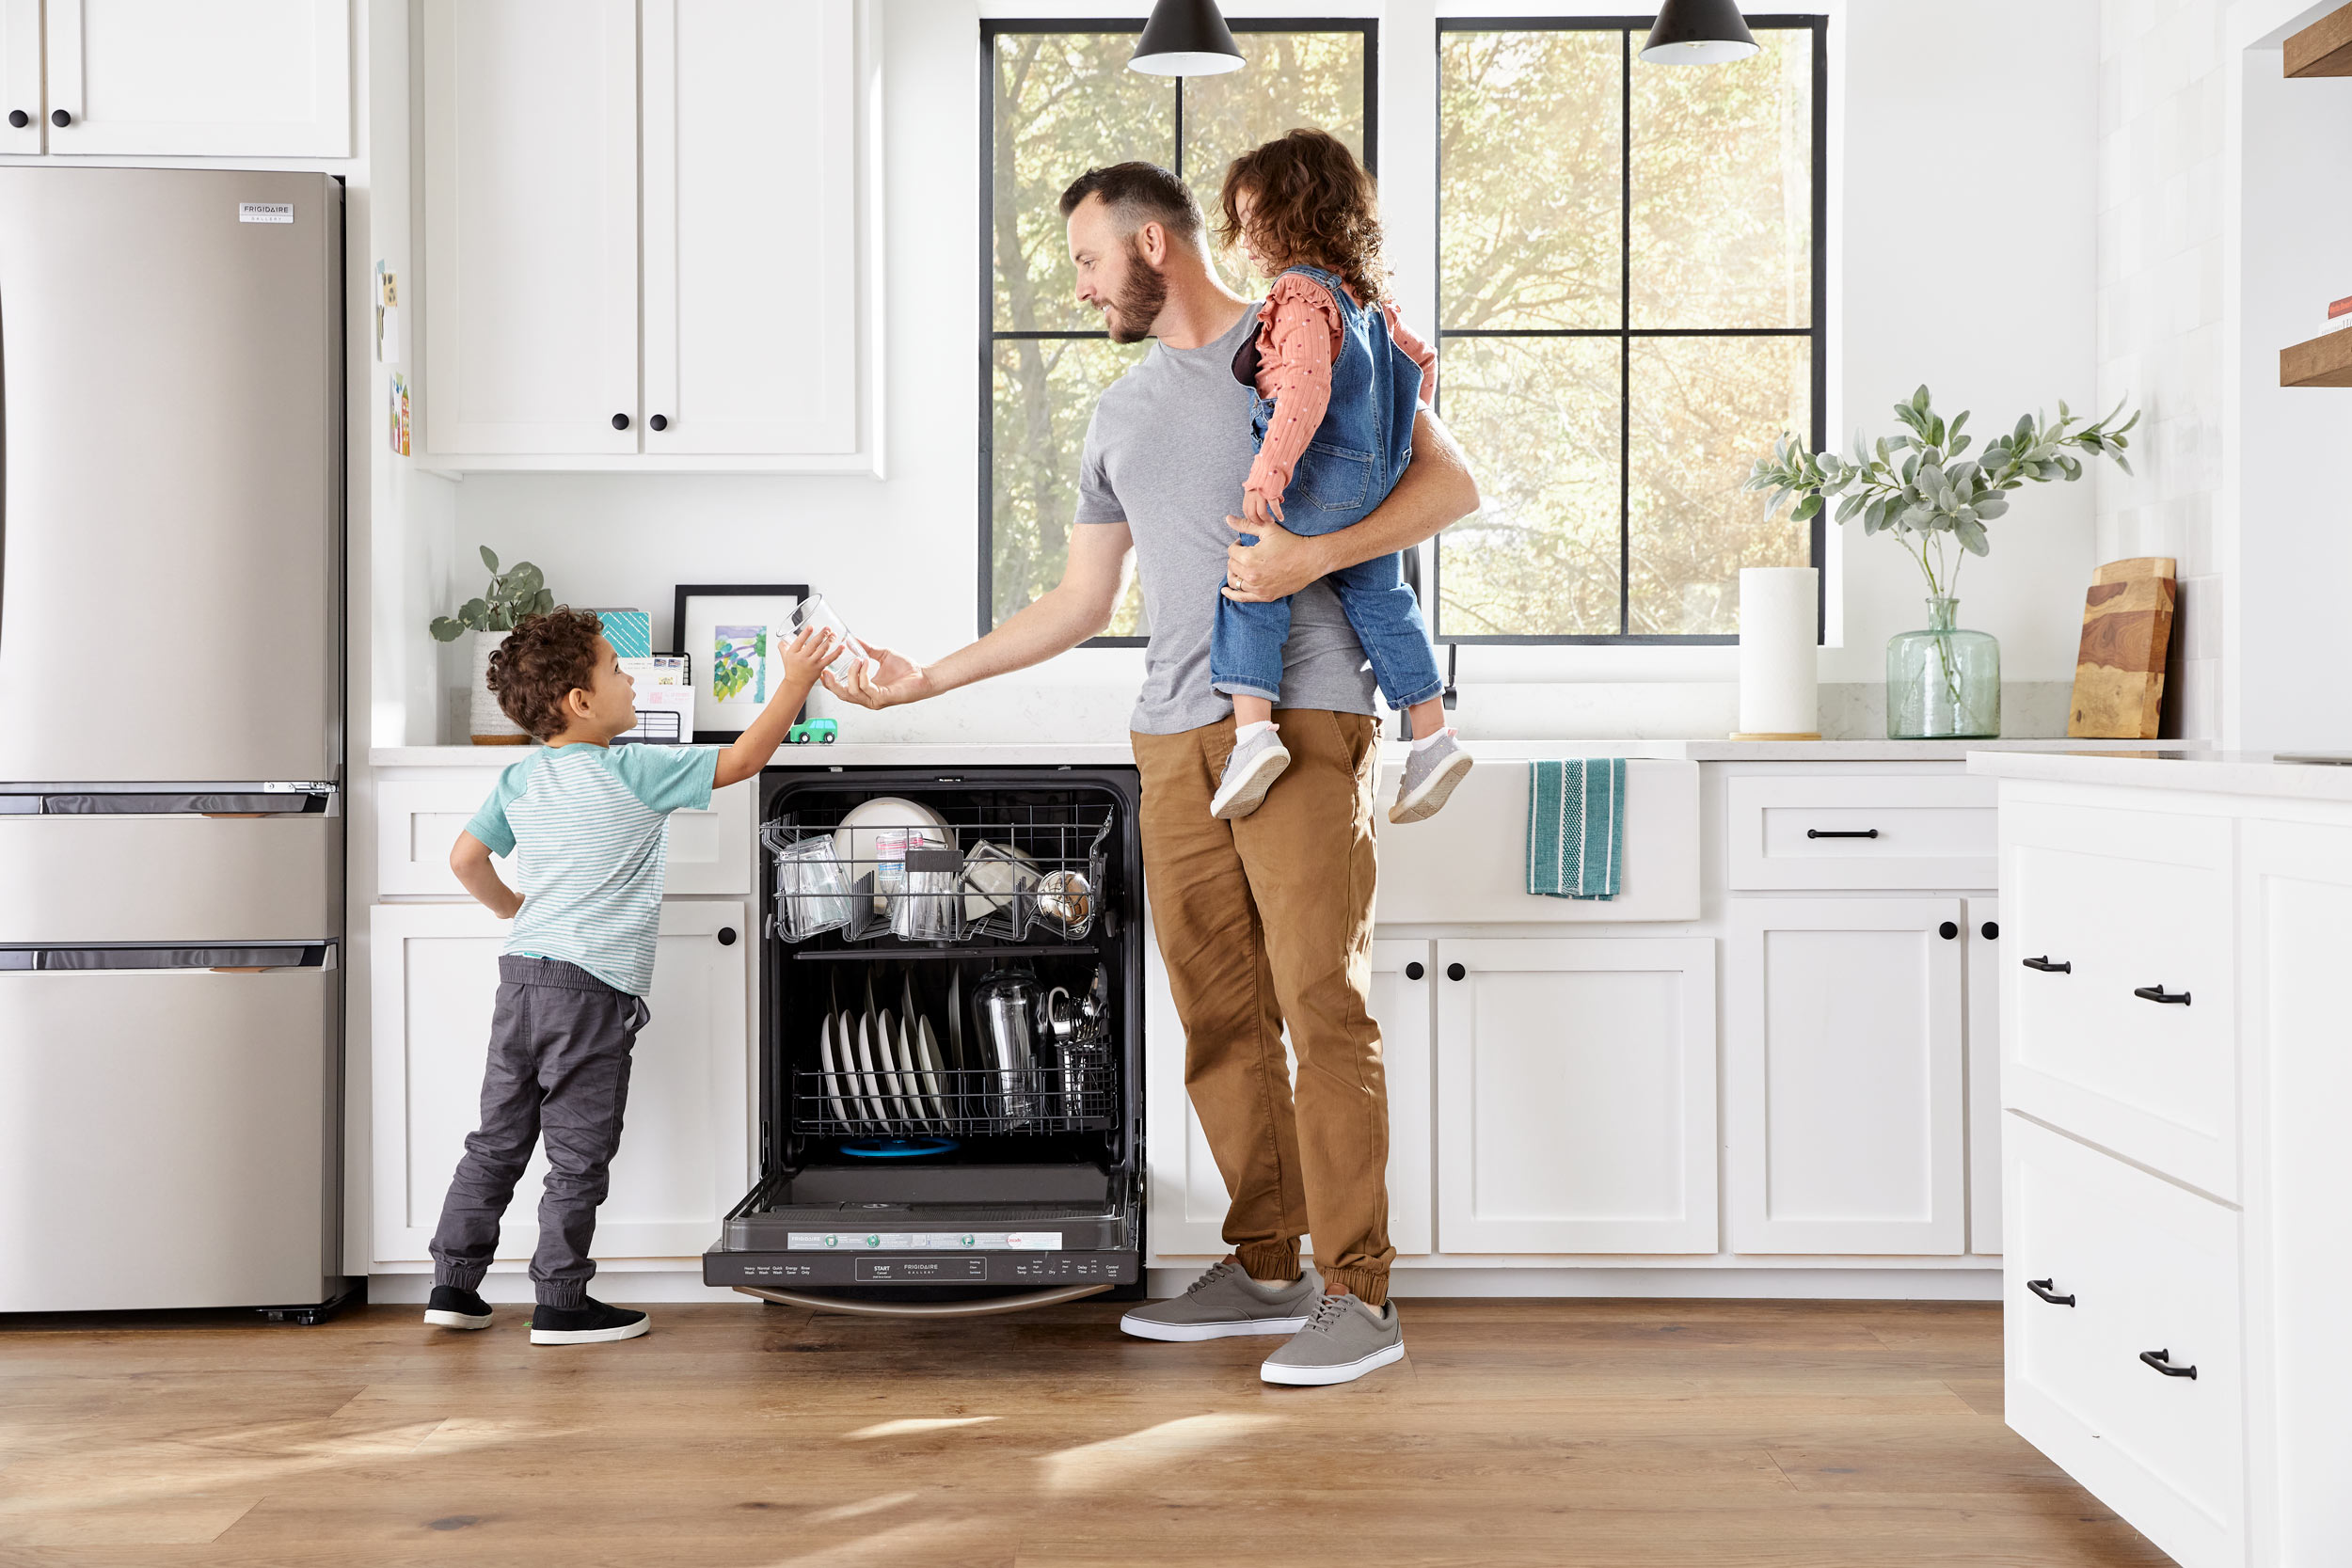 father-emptying-dishwasher-with-kids-dc-commercial-photography-eli-meir-kaplan